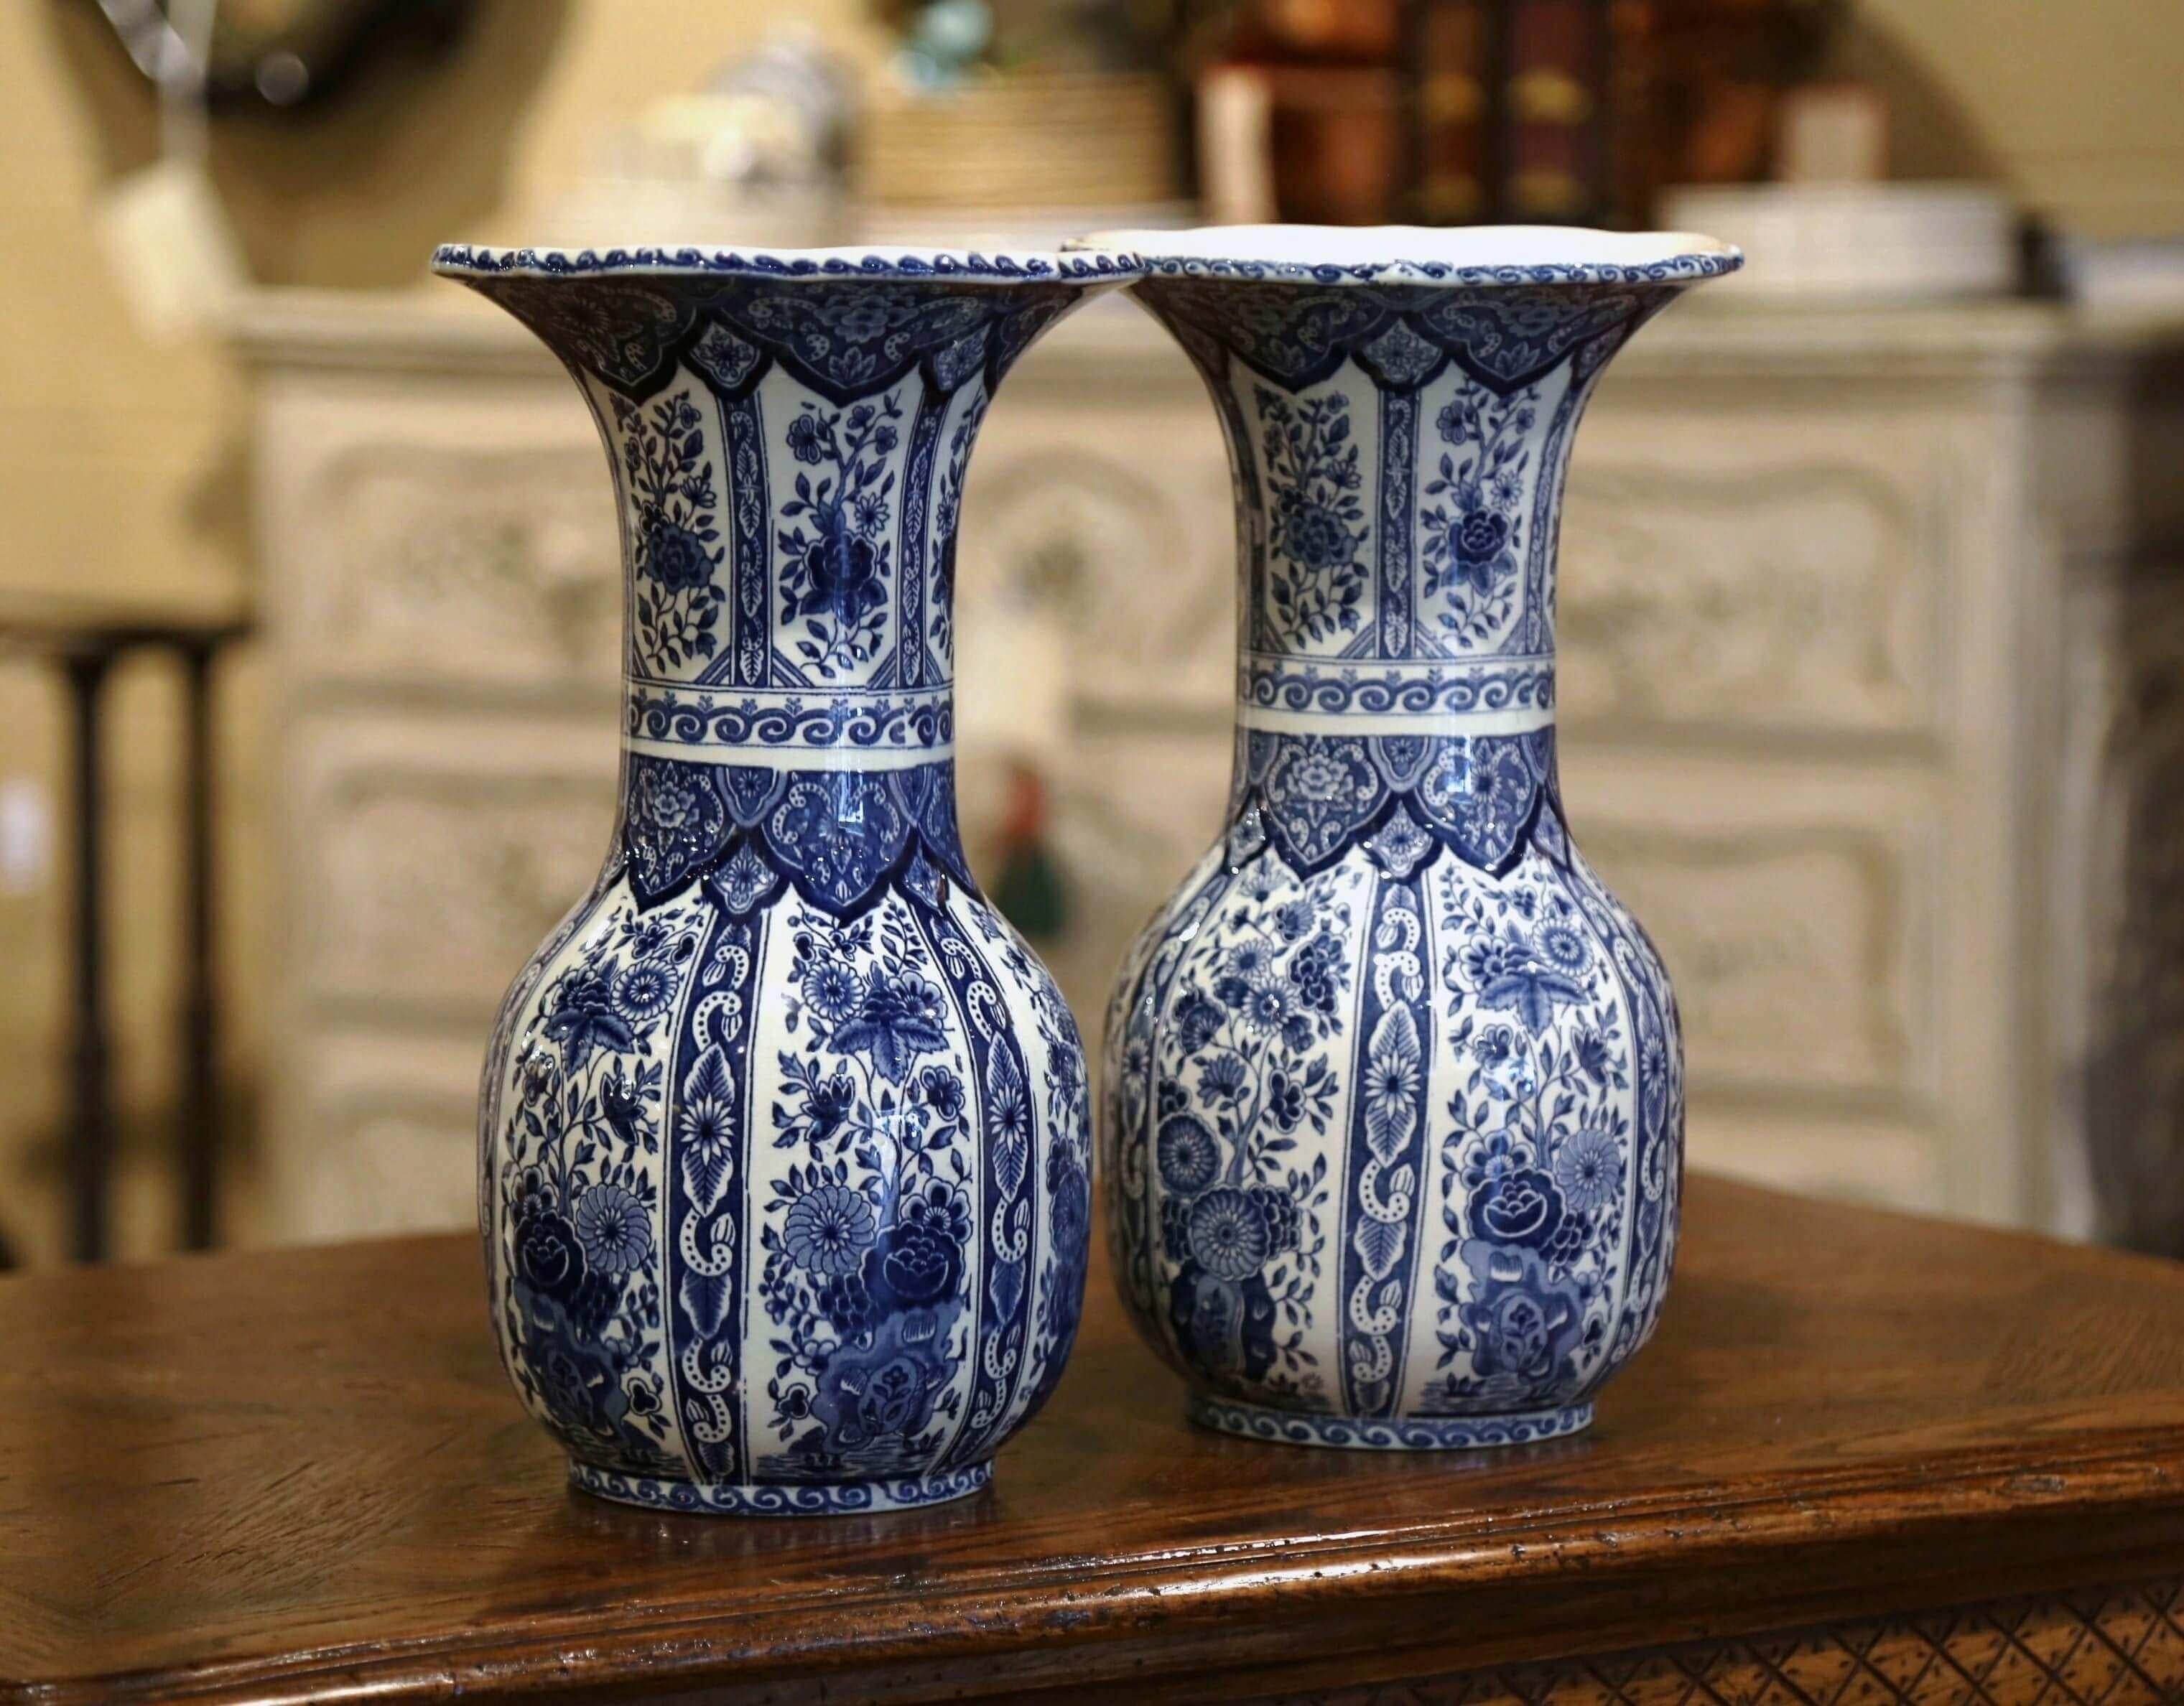 Ceramic Pair of Mid-20th Century Dutch Royal Blue and White Painted Faience Delft Vases